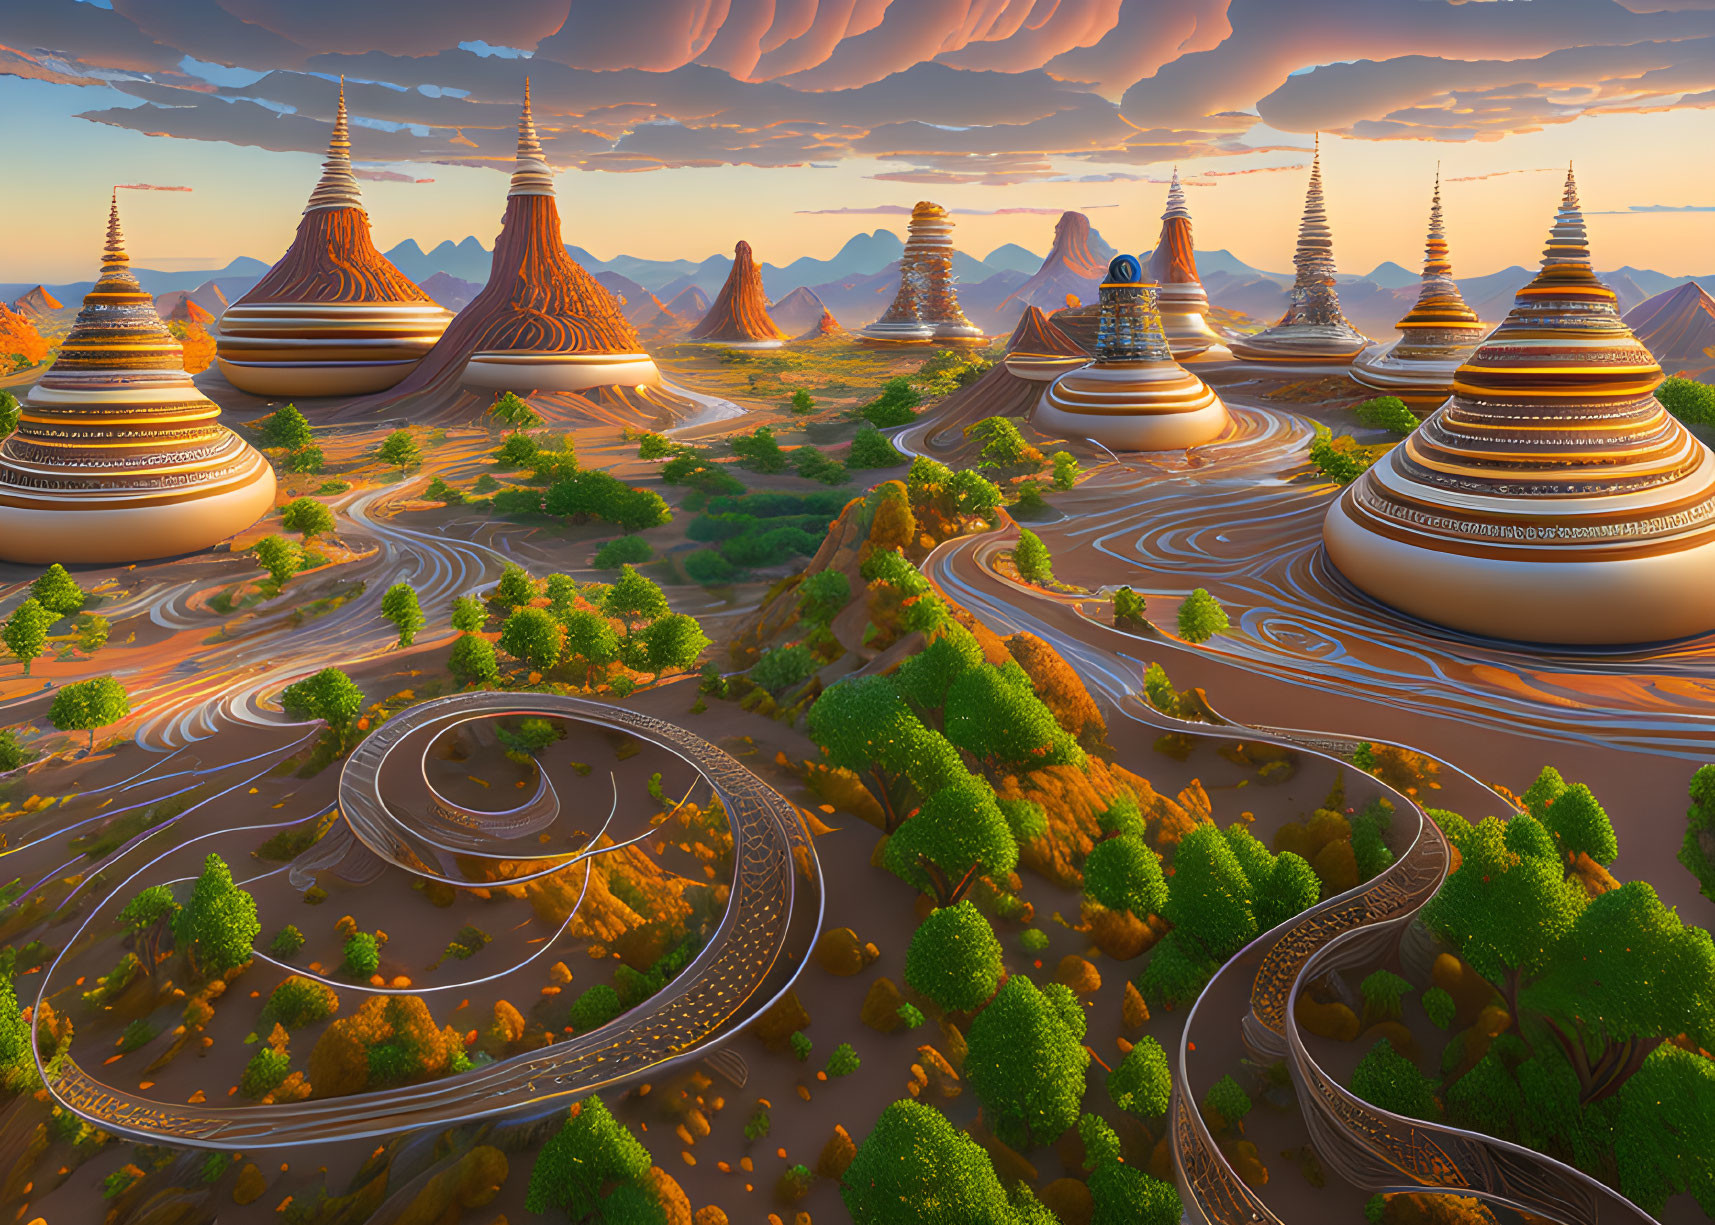 Futuristic landscape with terraced mountains and swirling roads